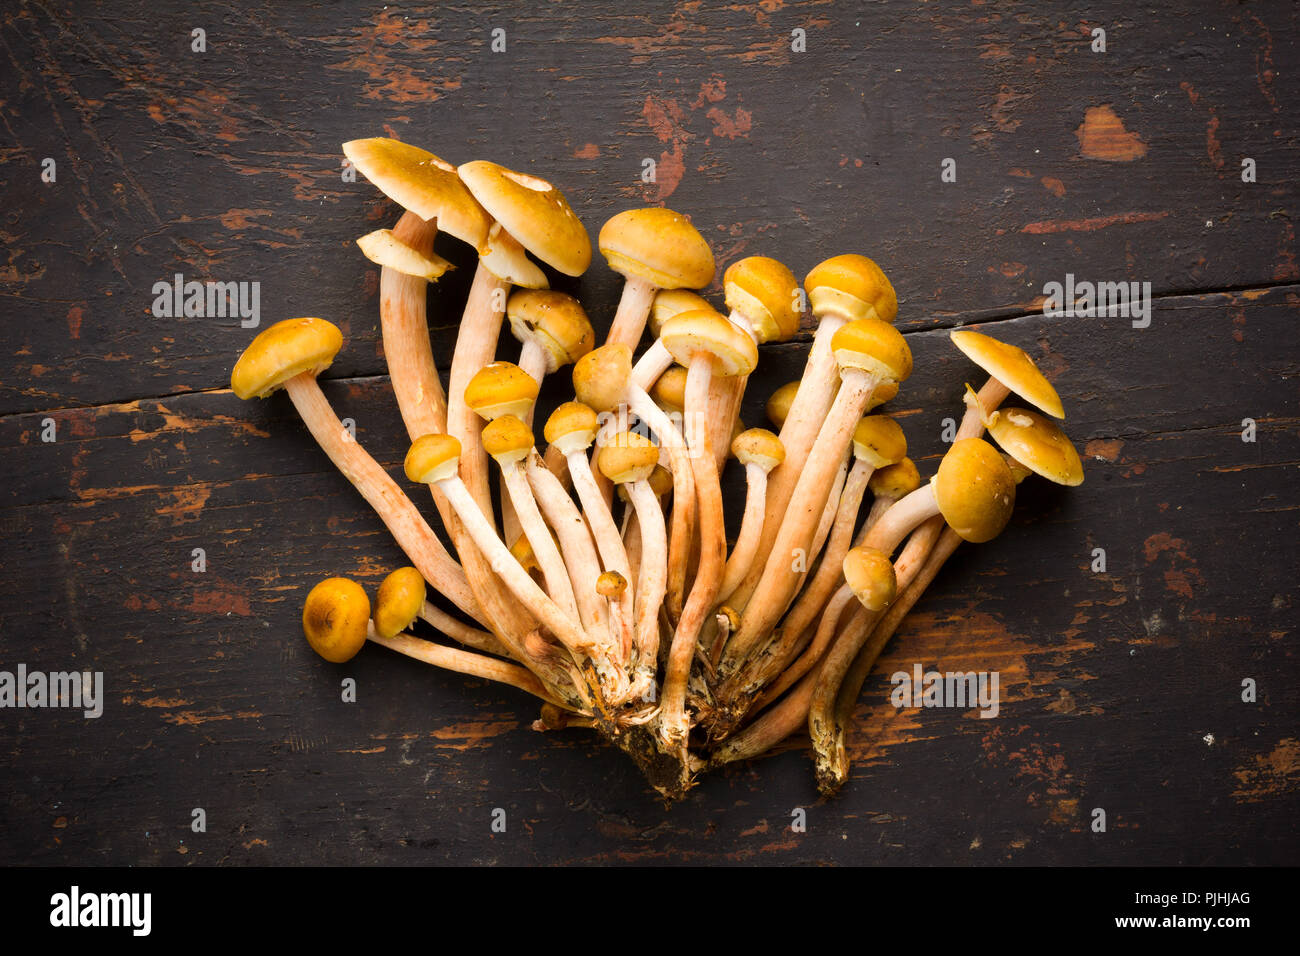 Raw Yellow Edible Forest Mushrooms Mushrooms On An Old Black Wooden Table Close-Up Top View Stock Photo